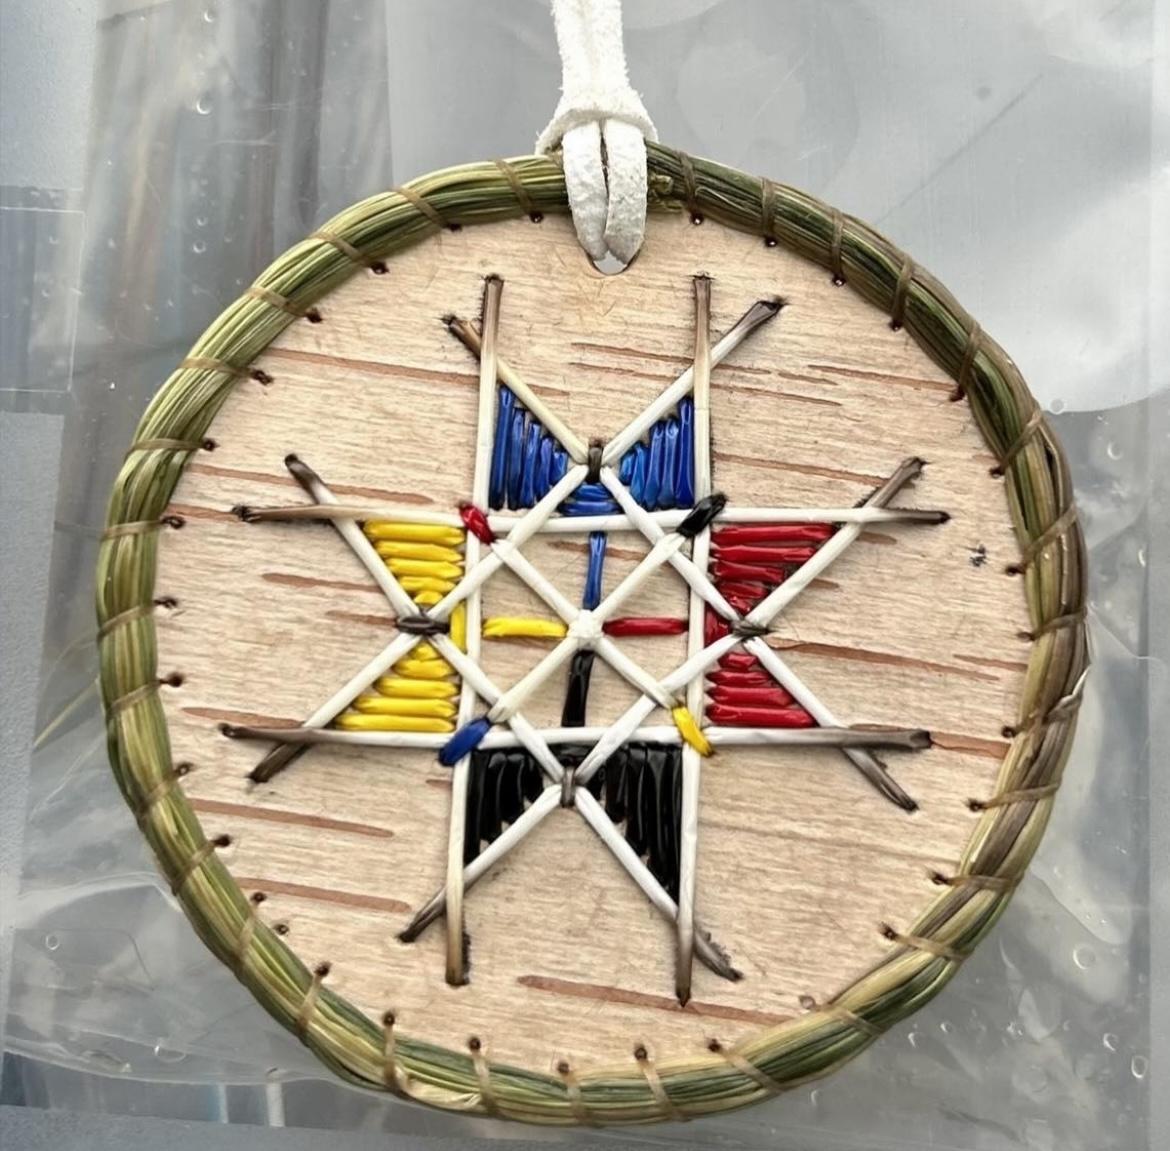 Photograph of a porcupine quillwork medallion made by Crystal Gloade on a round piece of birchbark and edged with sweetgrass. The quills make up a Mi'kmaq 8-point star design and are yellow, blue, red, black, and white.